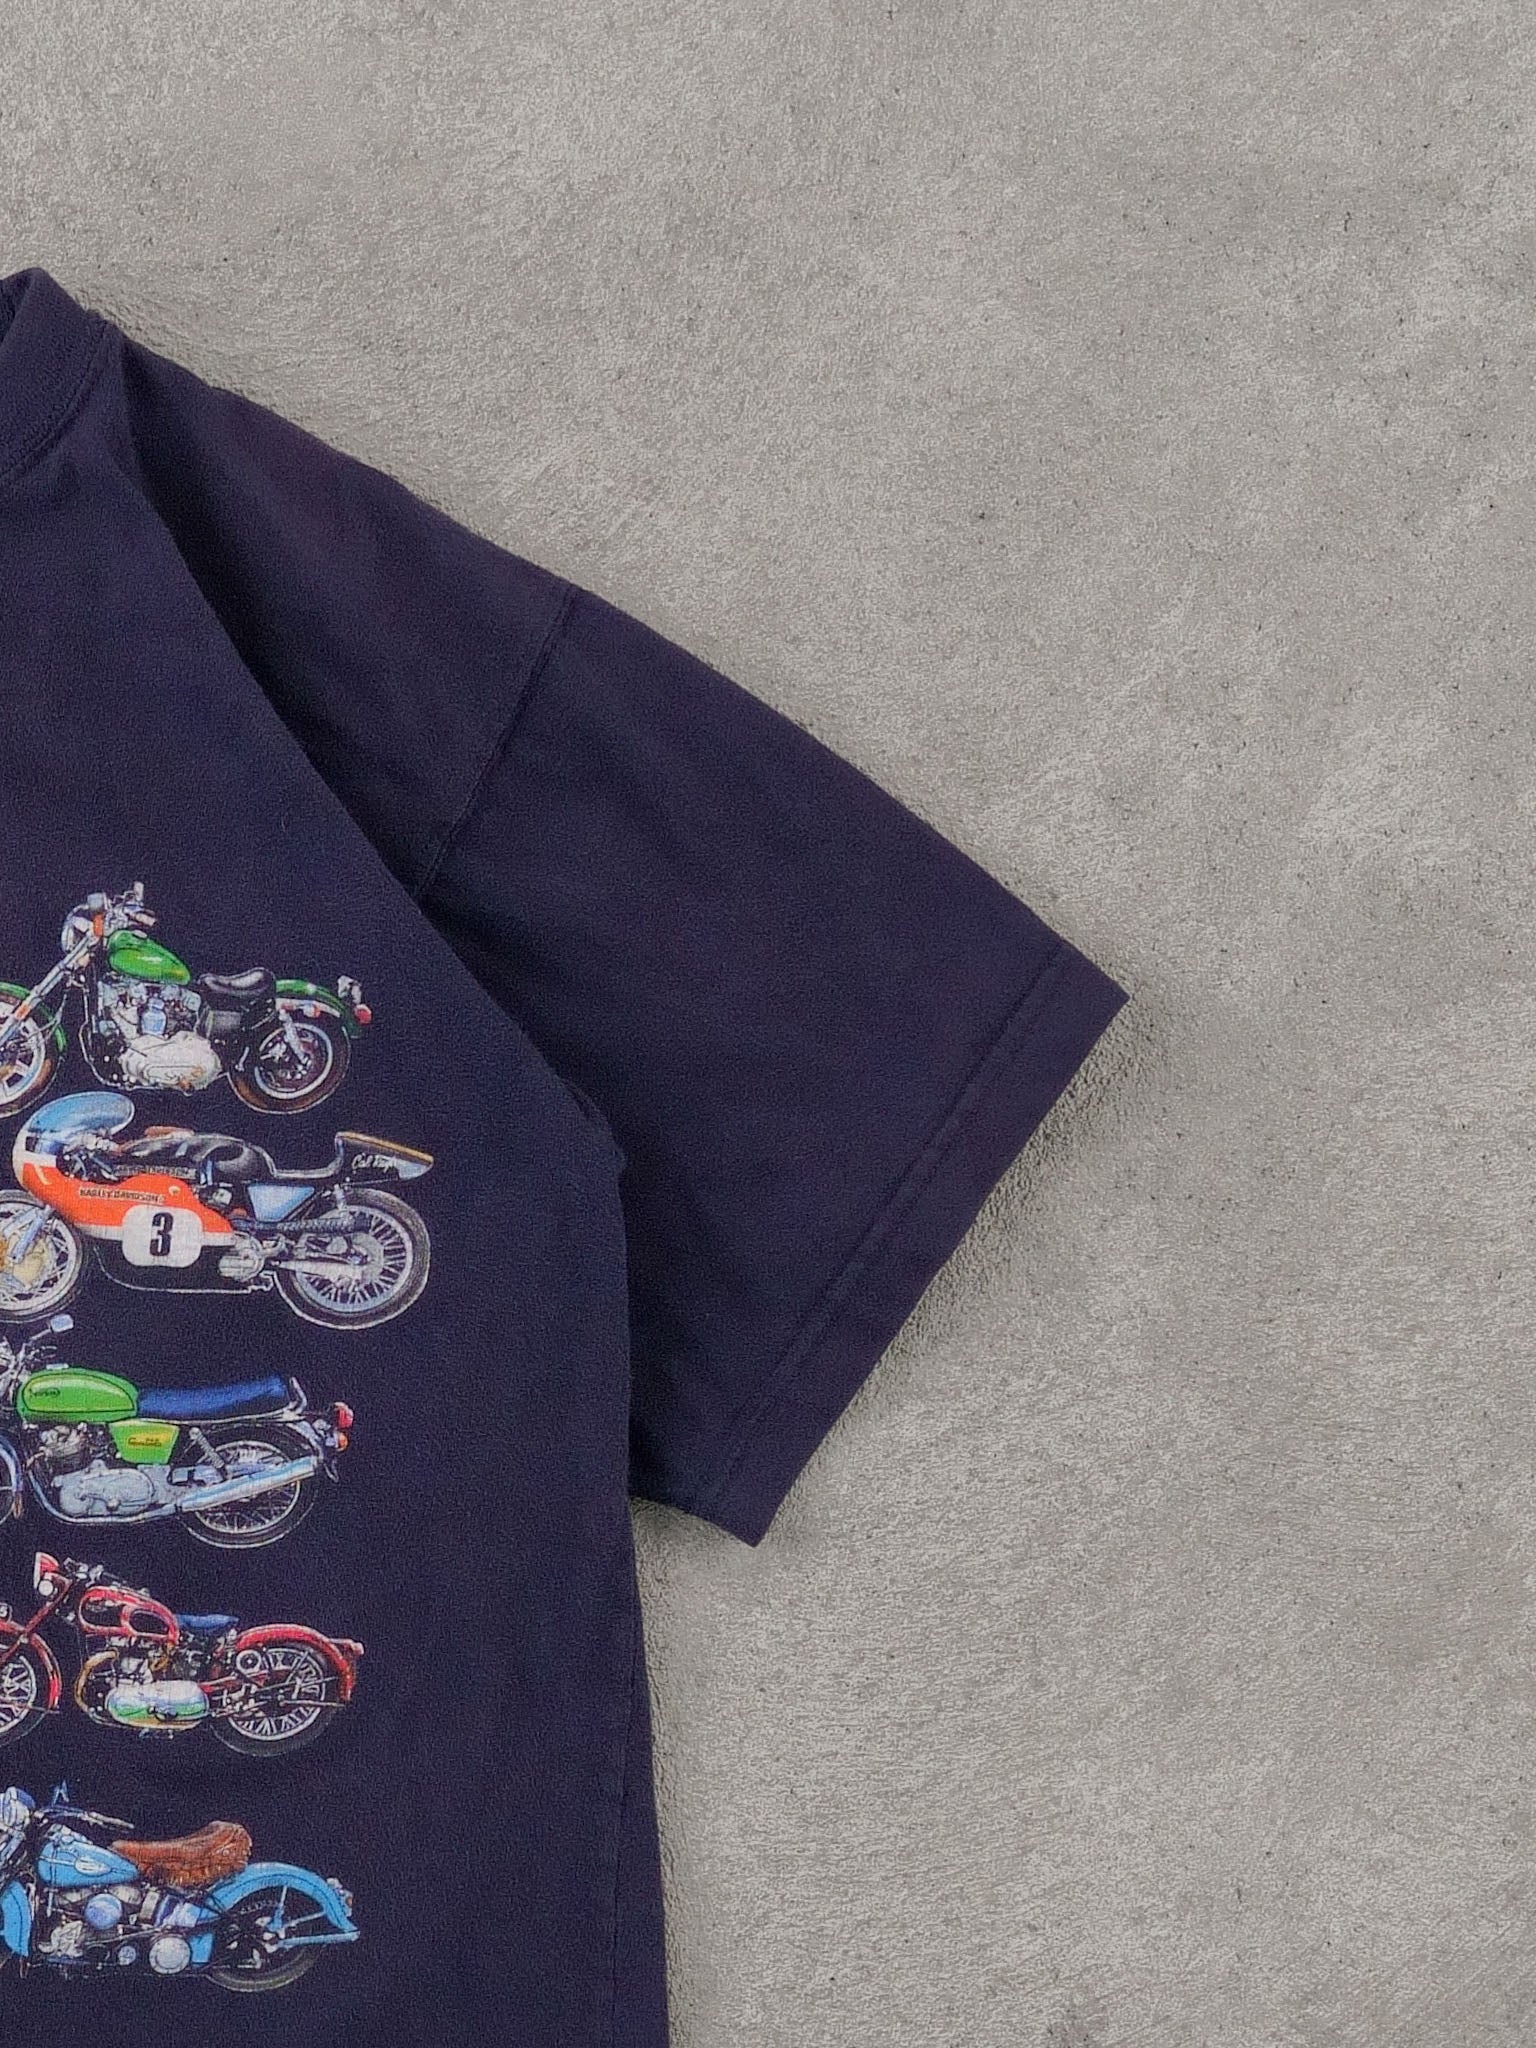 Vintage 90s Blue "Life is full of Important chocies" Biker Graphic Tee (M)